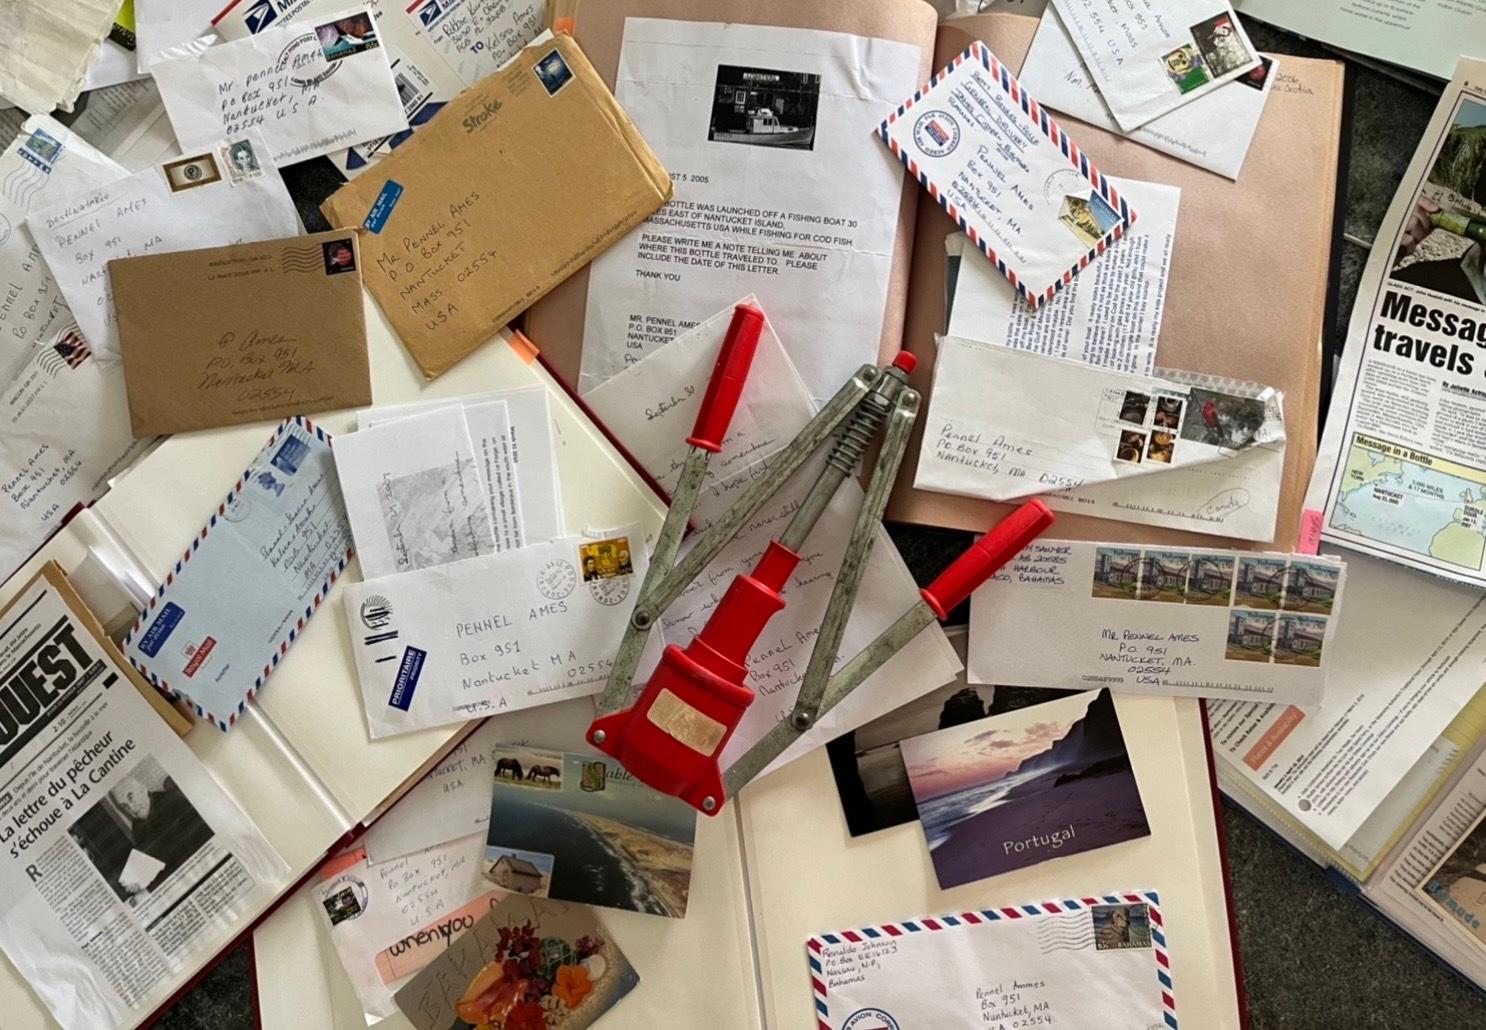 A handheld bottle corker rests on top of scrapbooks of letters, postcards, emails and press clippings of people who found bottles thrown by Pennel Ames into the ocean.